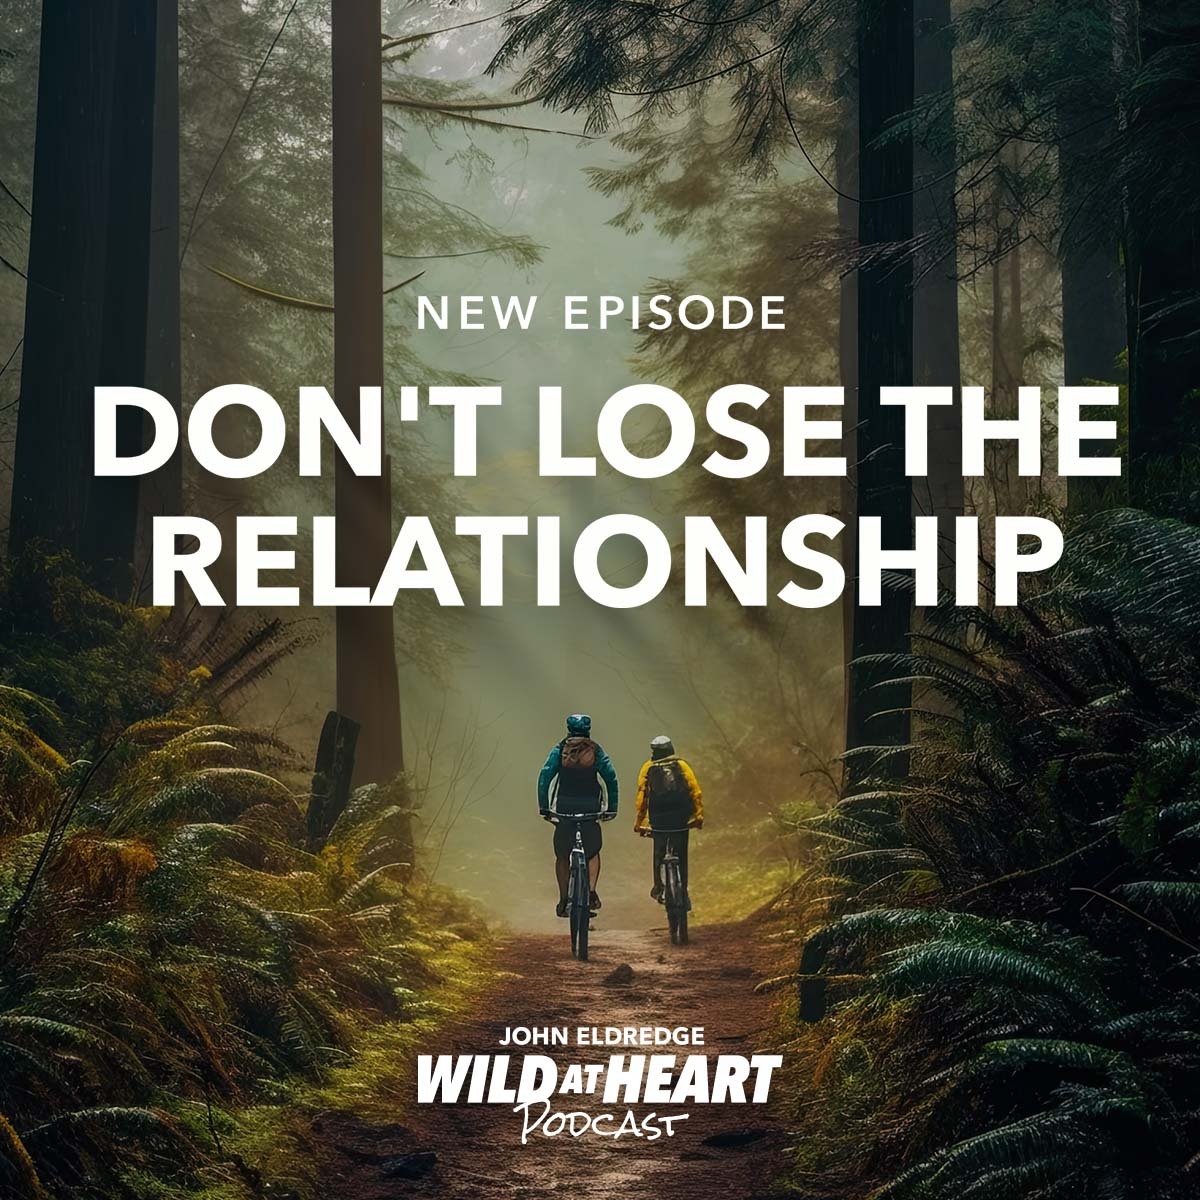 This week, John and Allen talk about how to protect the relationship with our teenage and young adult children—especially during turbulent times and difficult decisions. bit.ly/wahrelationship